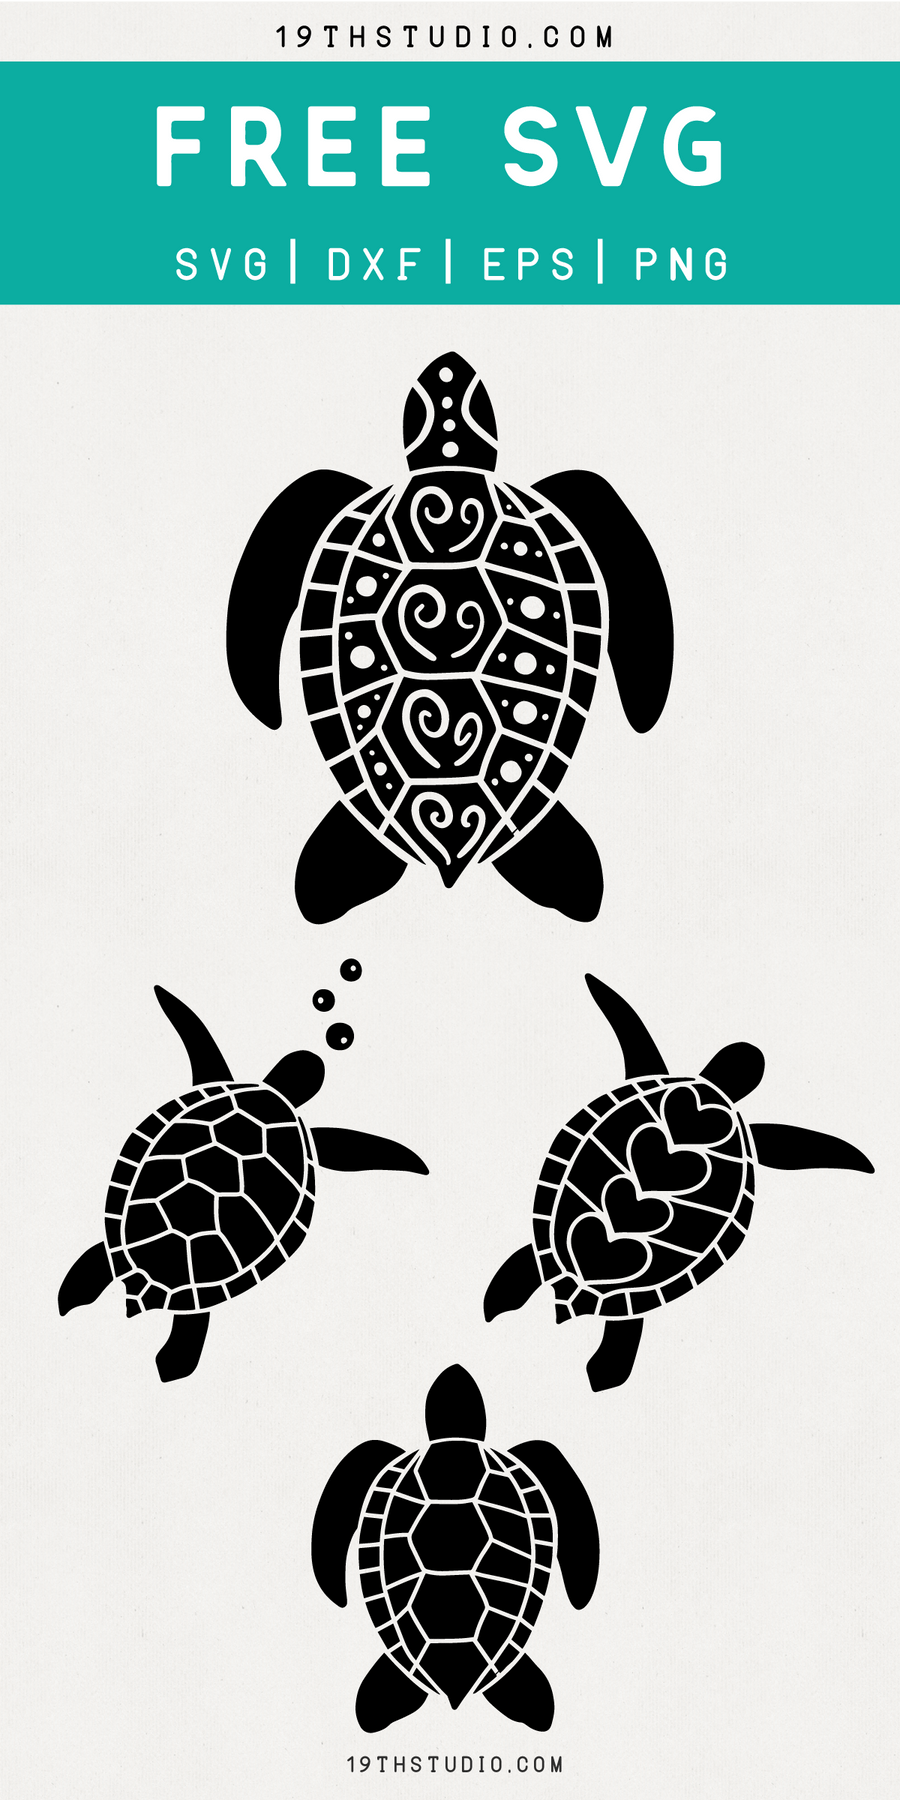 Download Free Svg Of Sea Creatures For Cricut Free 3d Turtle Layered Mandala Svg Fb89 Craft House Svg You Can Copy Modify Distribute And Perform The Work Even